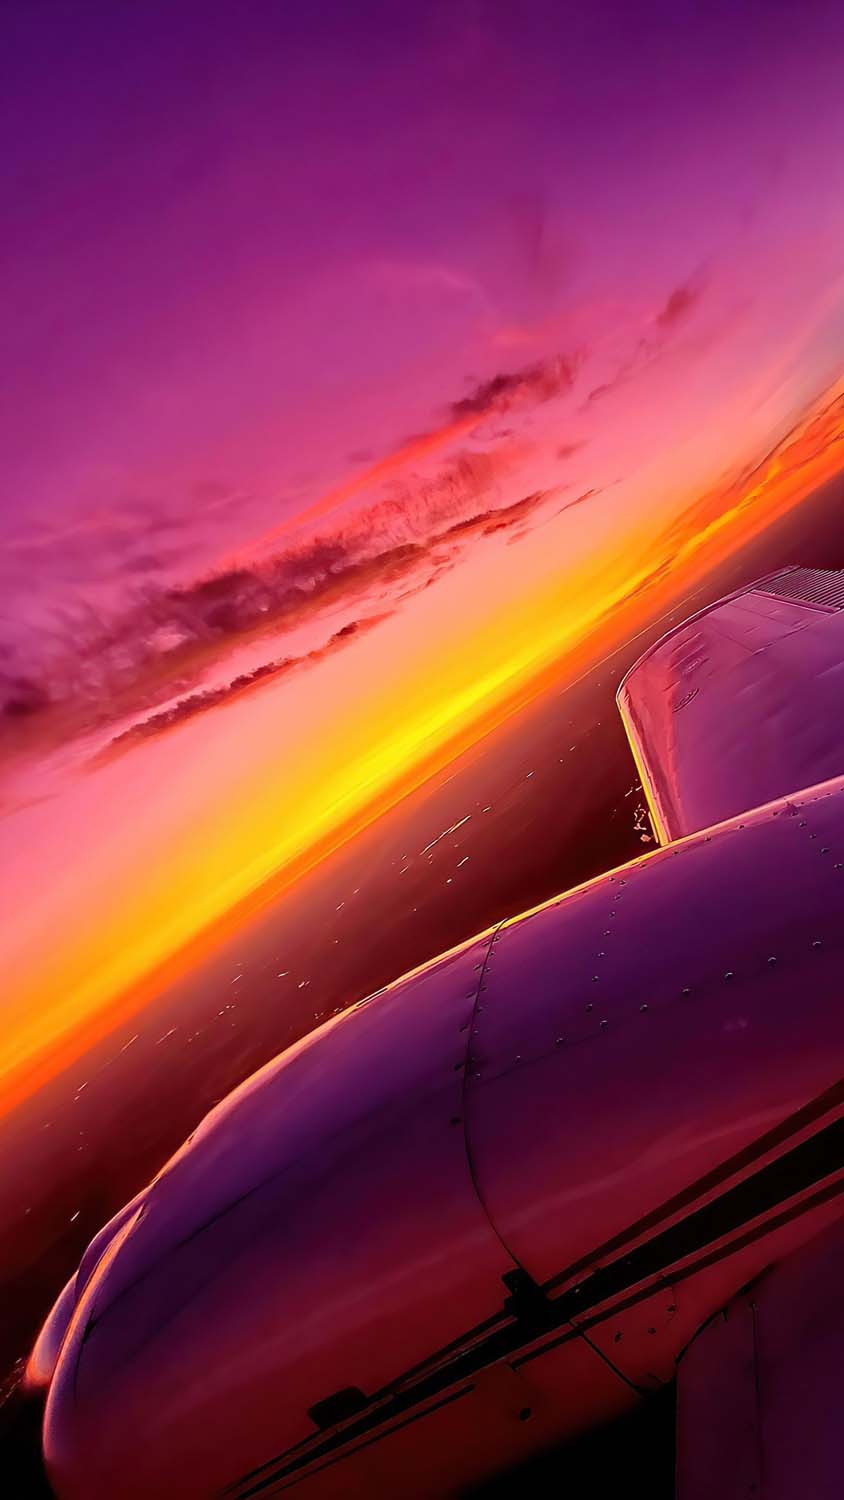 Synthwave Sunset Plane View iPhone Wallpaper HD